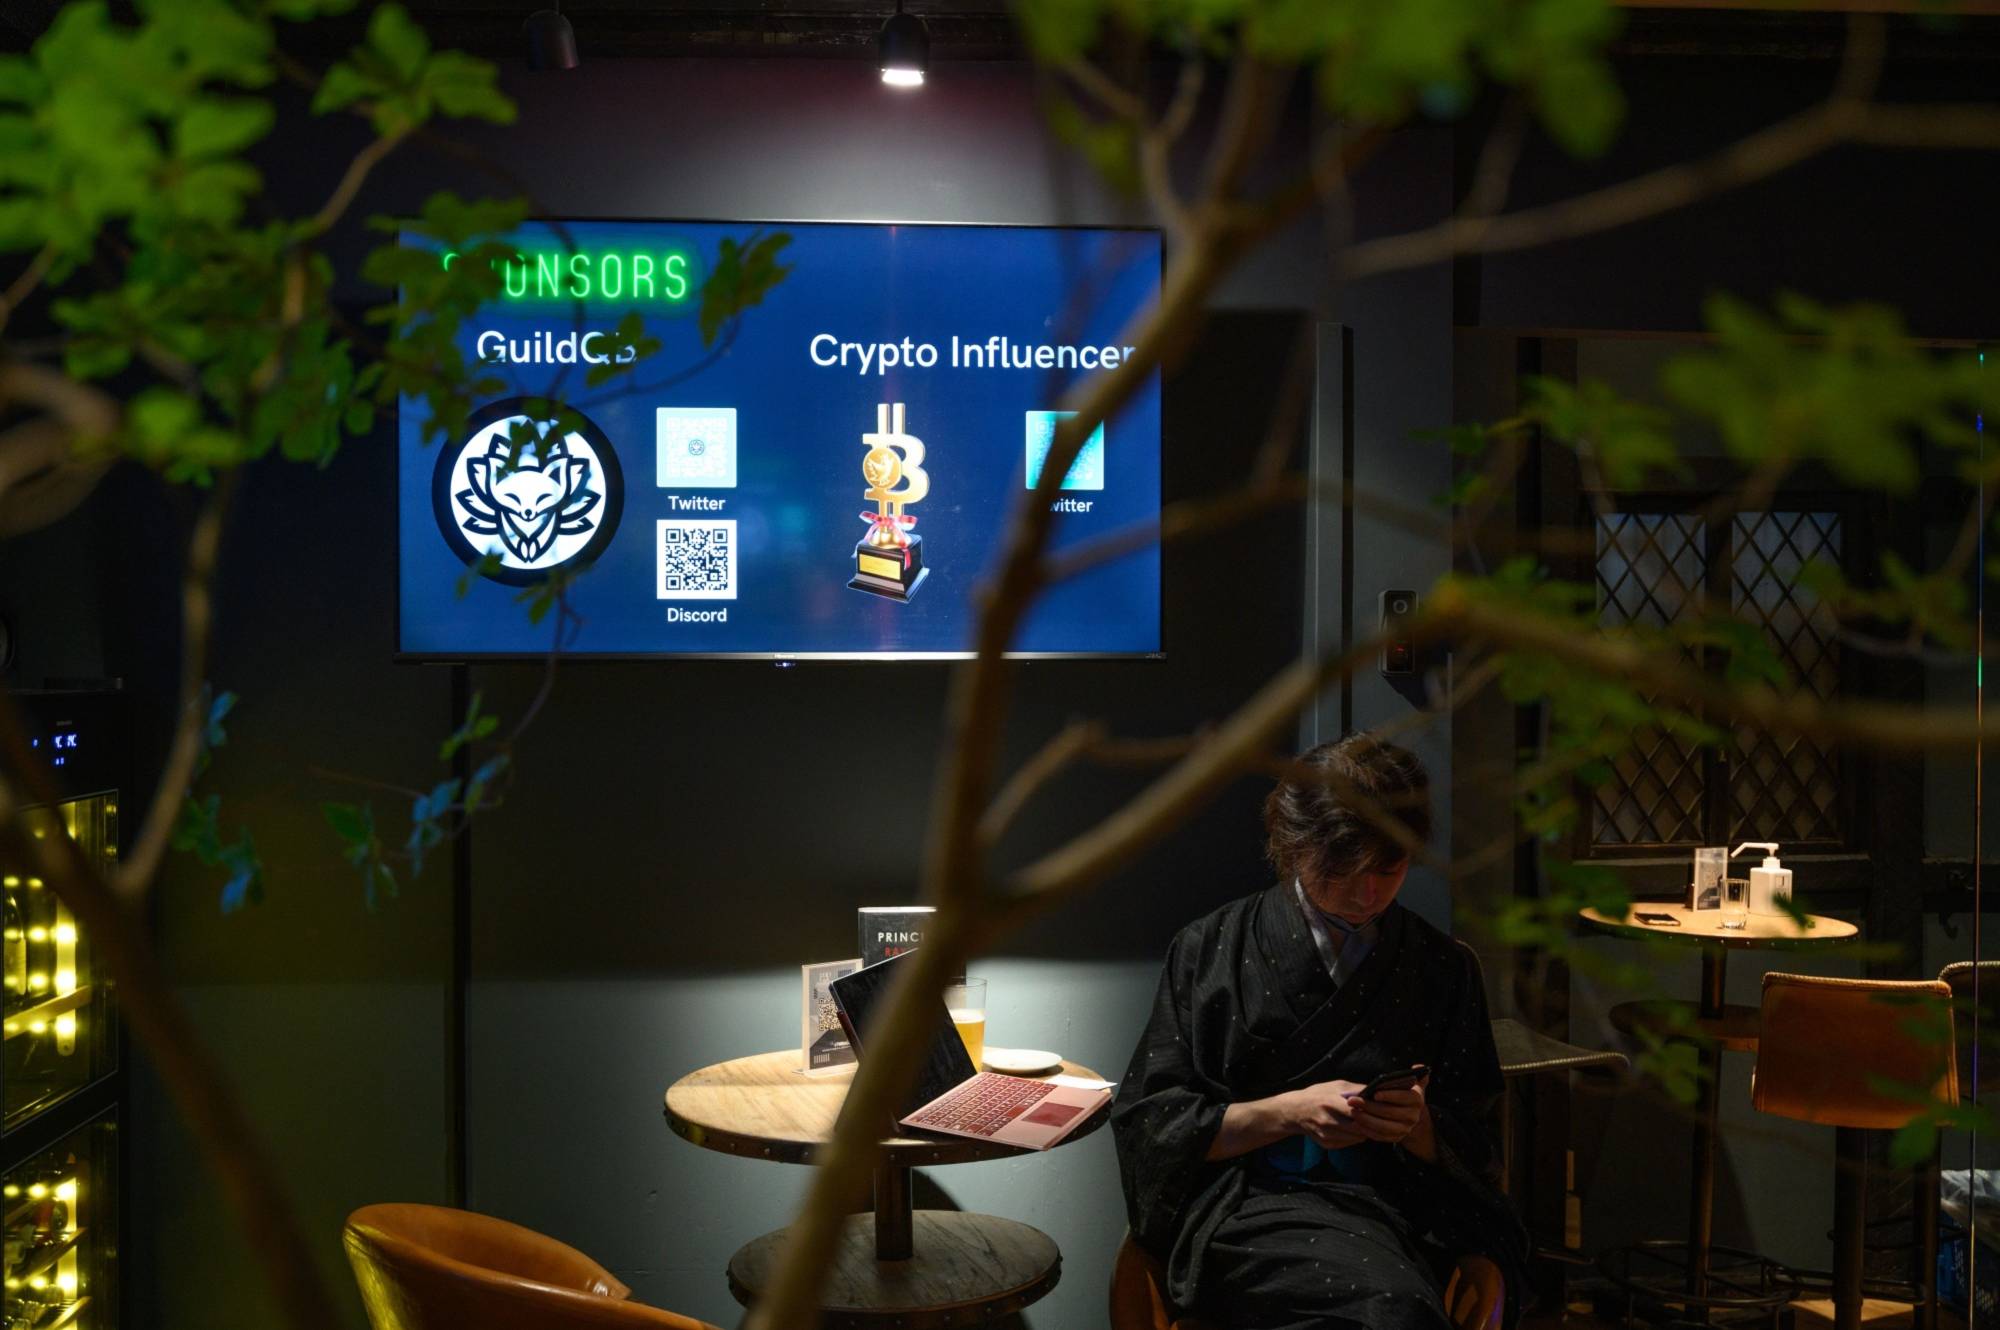 The logos of GuildQB and Crypto Influencer are displayed at CryptoBar P2P in Tokyo's Ginza district in June. Cryptocurrency lobbying groups in Japan plan to ask the government to ease corporate tax rules that are seen to be stunting growth of the local digital asset industry. | BLOOMBERG